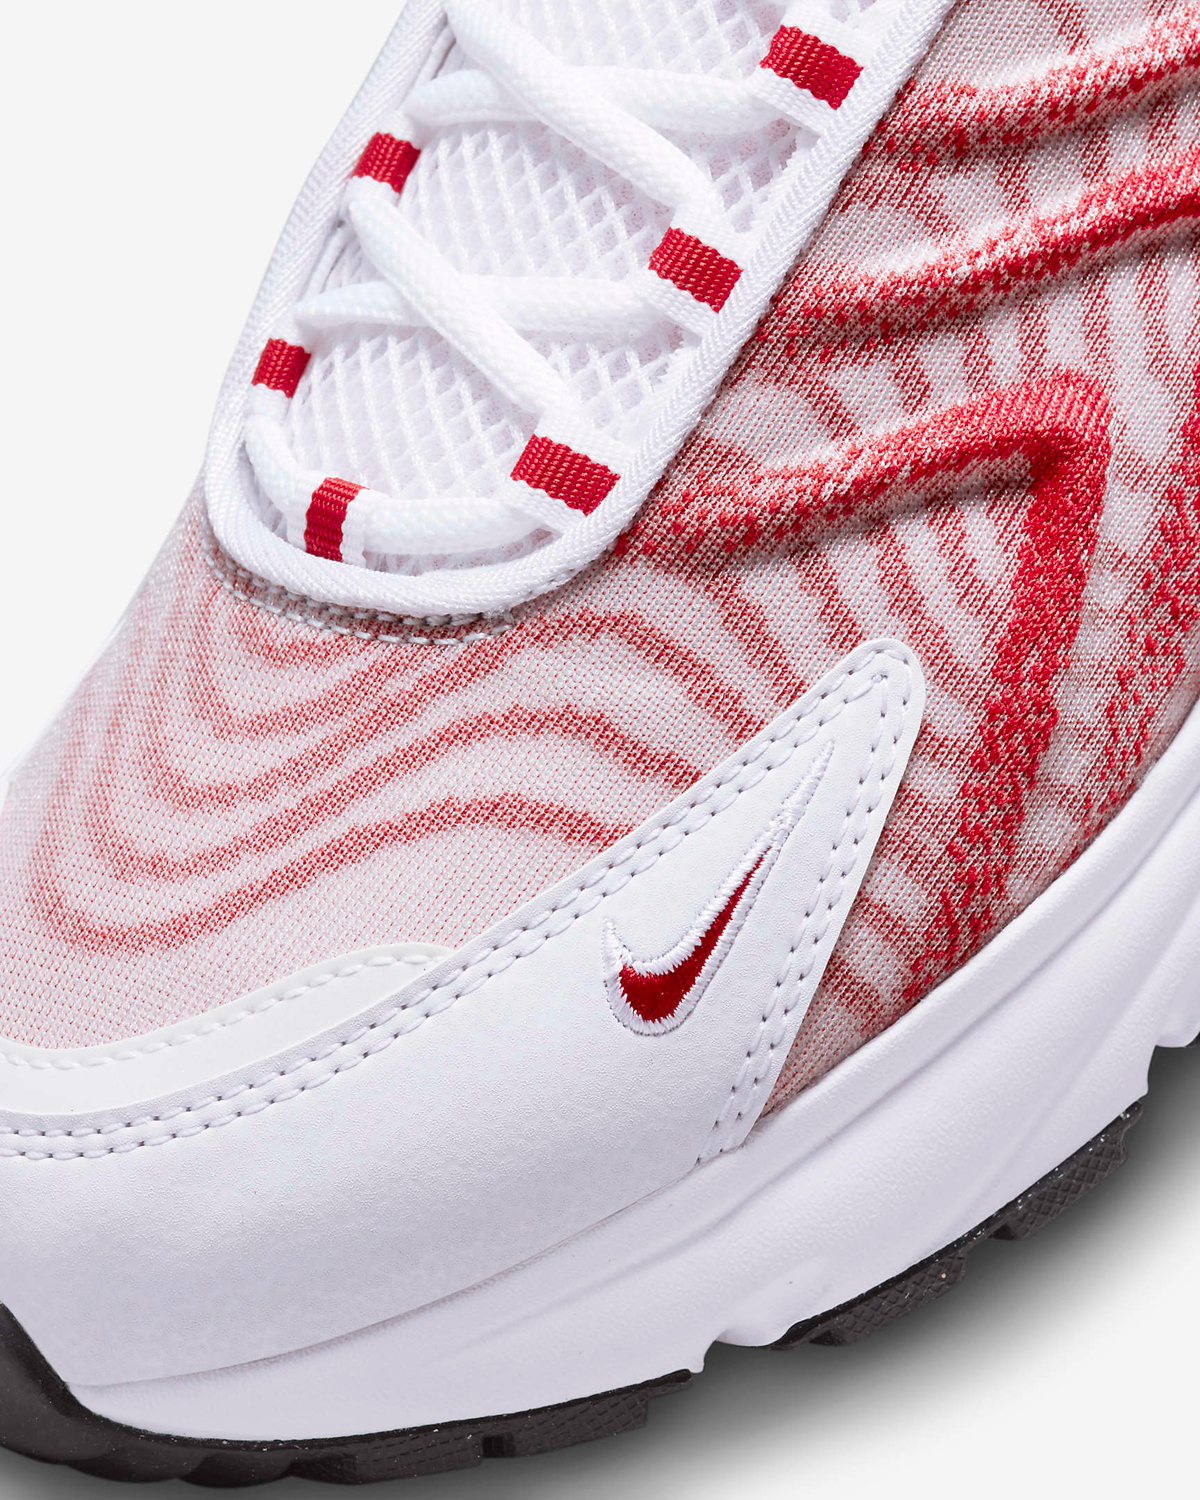 Nike-Air-Max-TW-White-University-Red-Release-Date-7